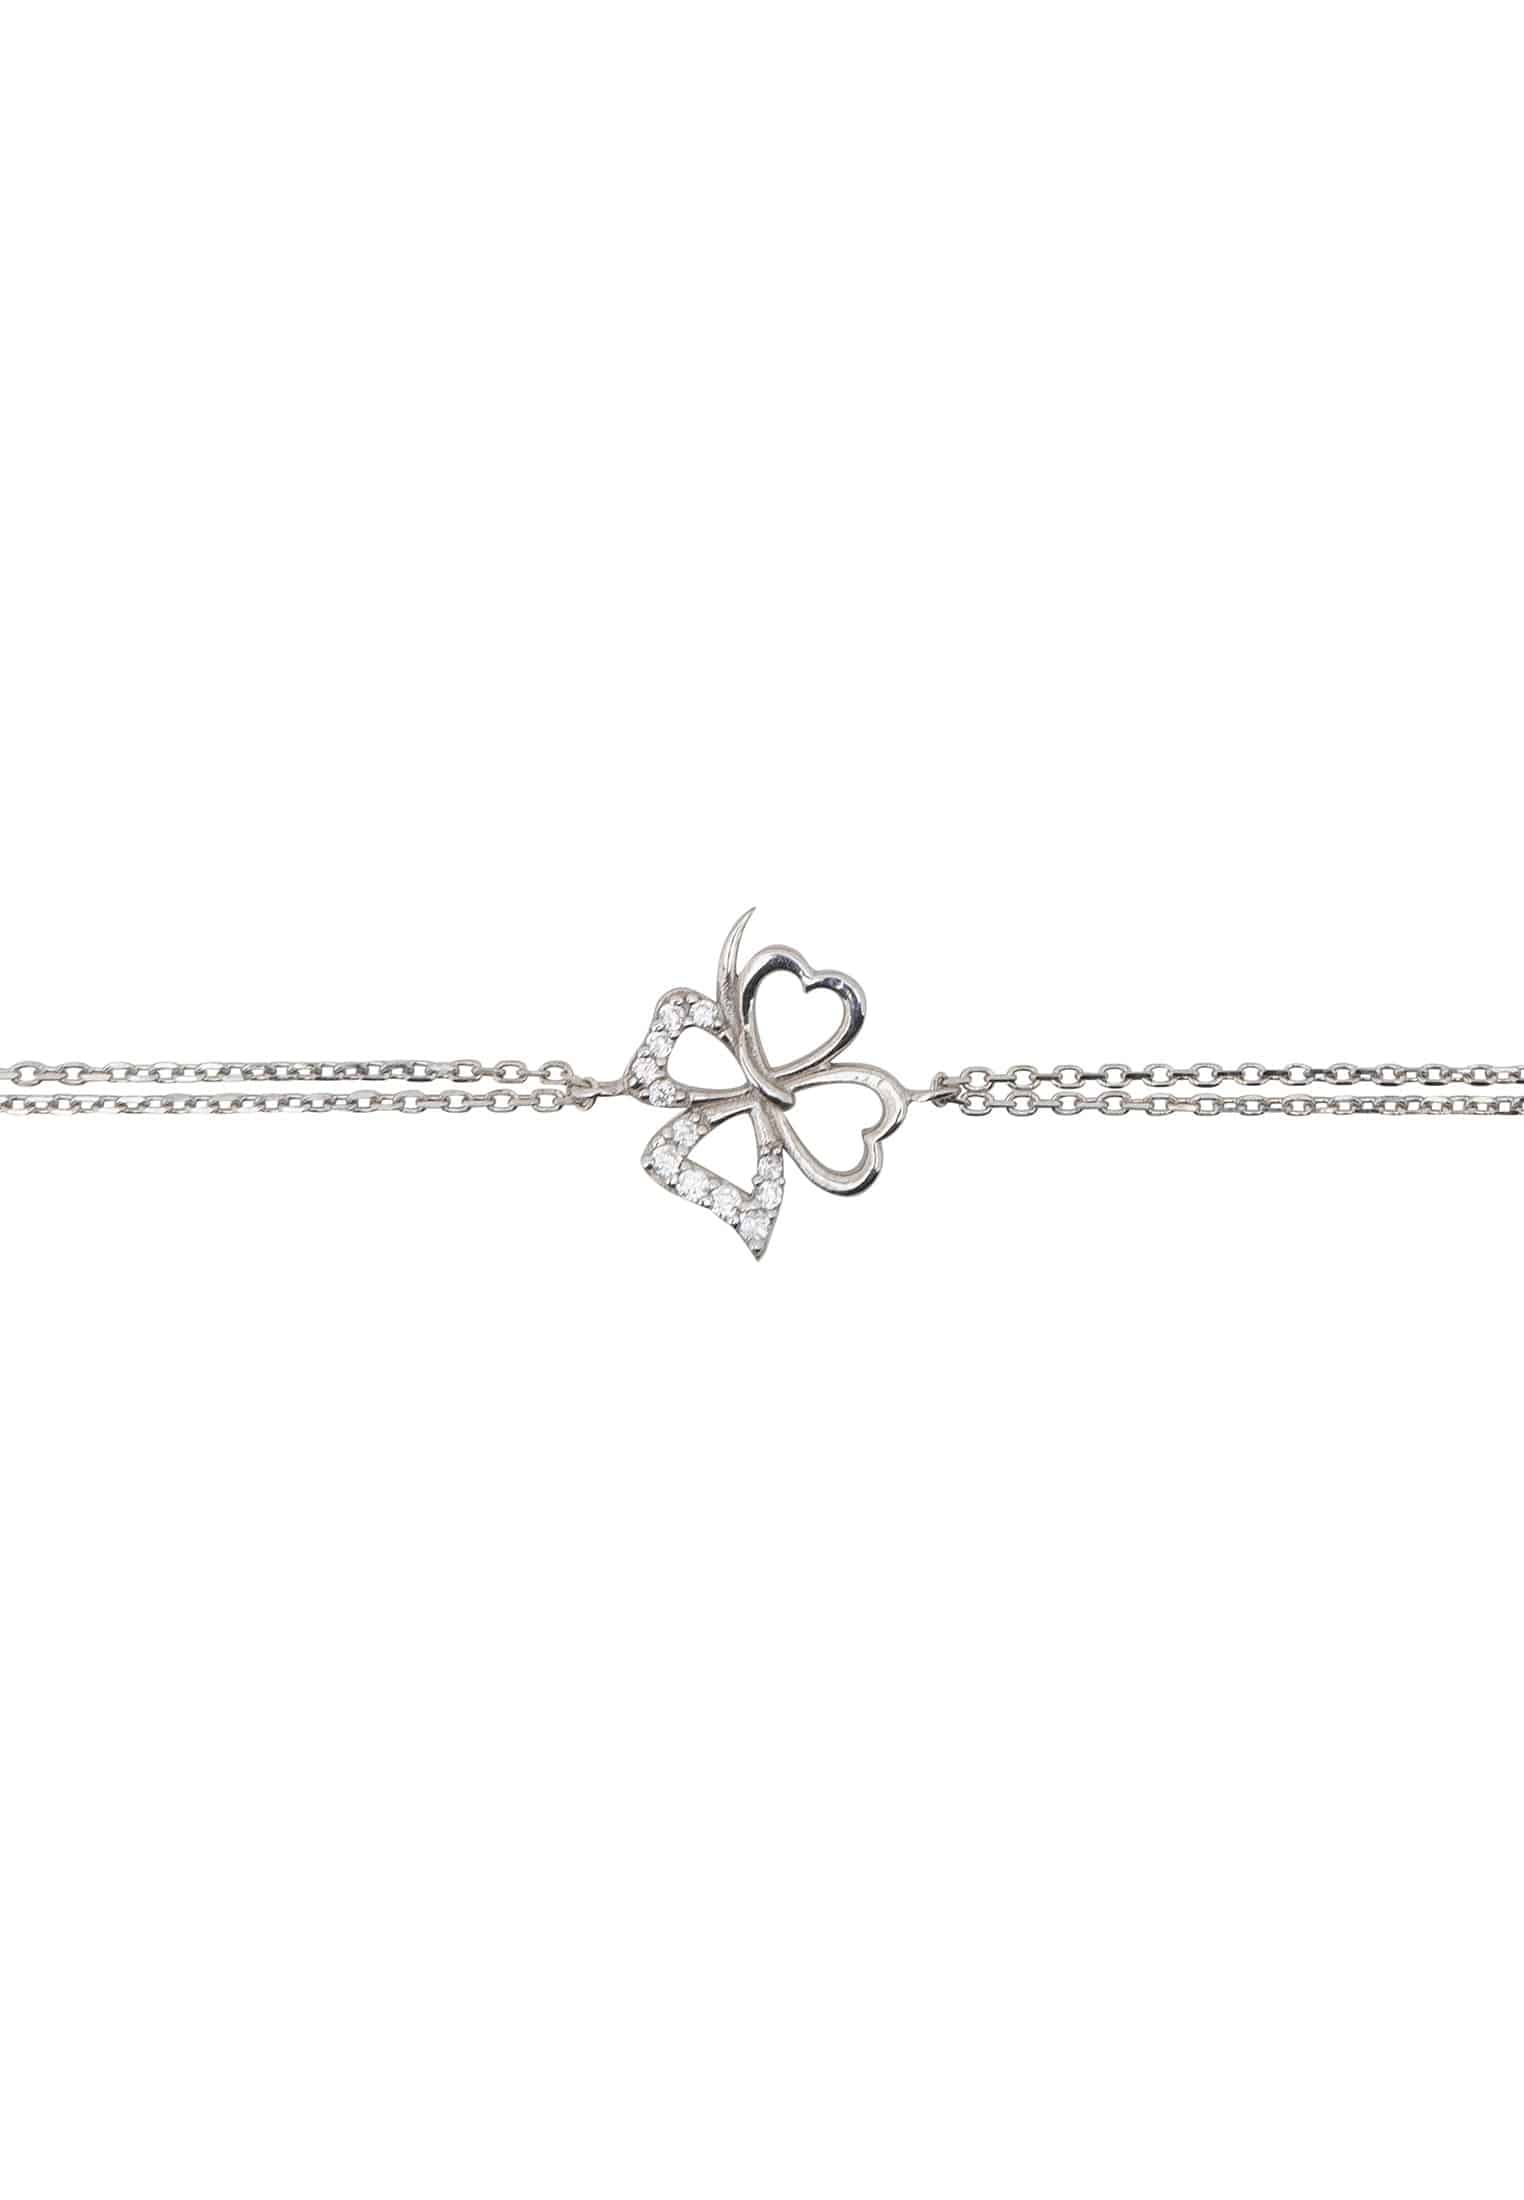 Sterling Silver Lucky Shamrock Clover Bracelet with Zirconia Accents - Jewelry & Watches - Bijou Her -  -  - 